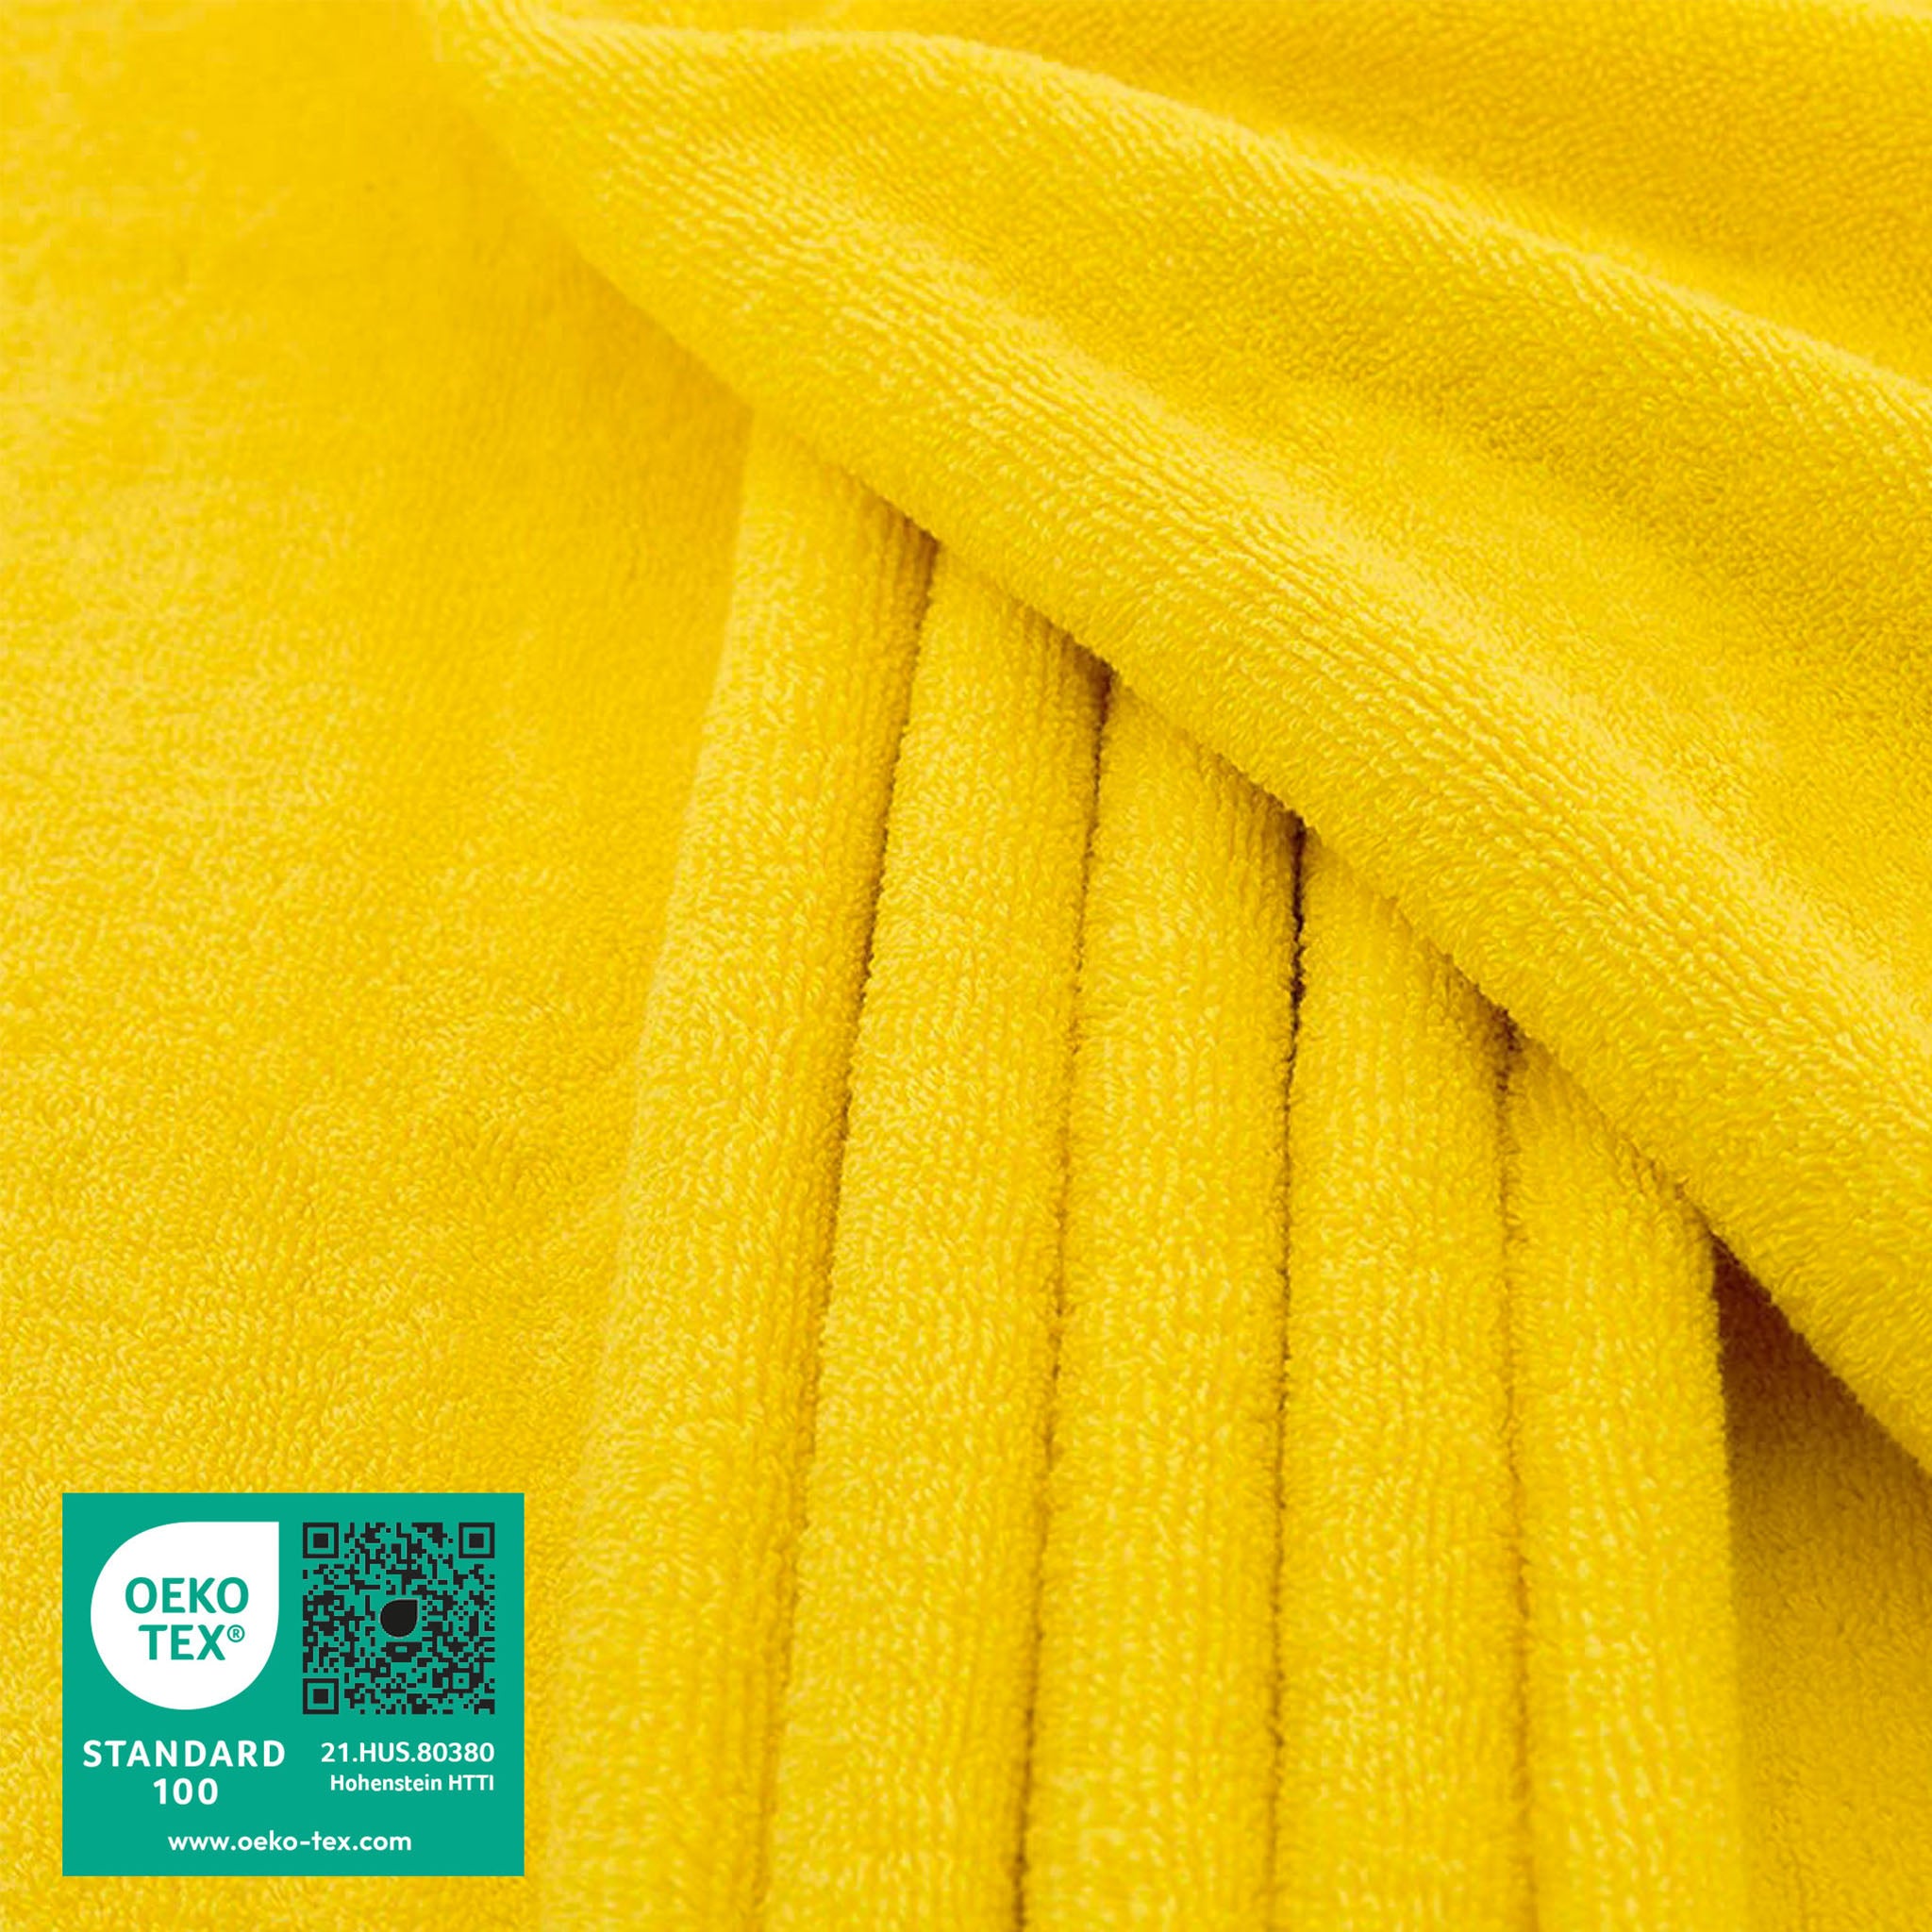 American Soft Linen 100% Ring Spun Cotton 40x80 Inches Oversized Bath Sheets yellow-2